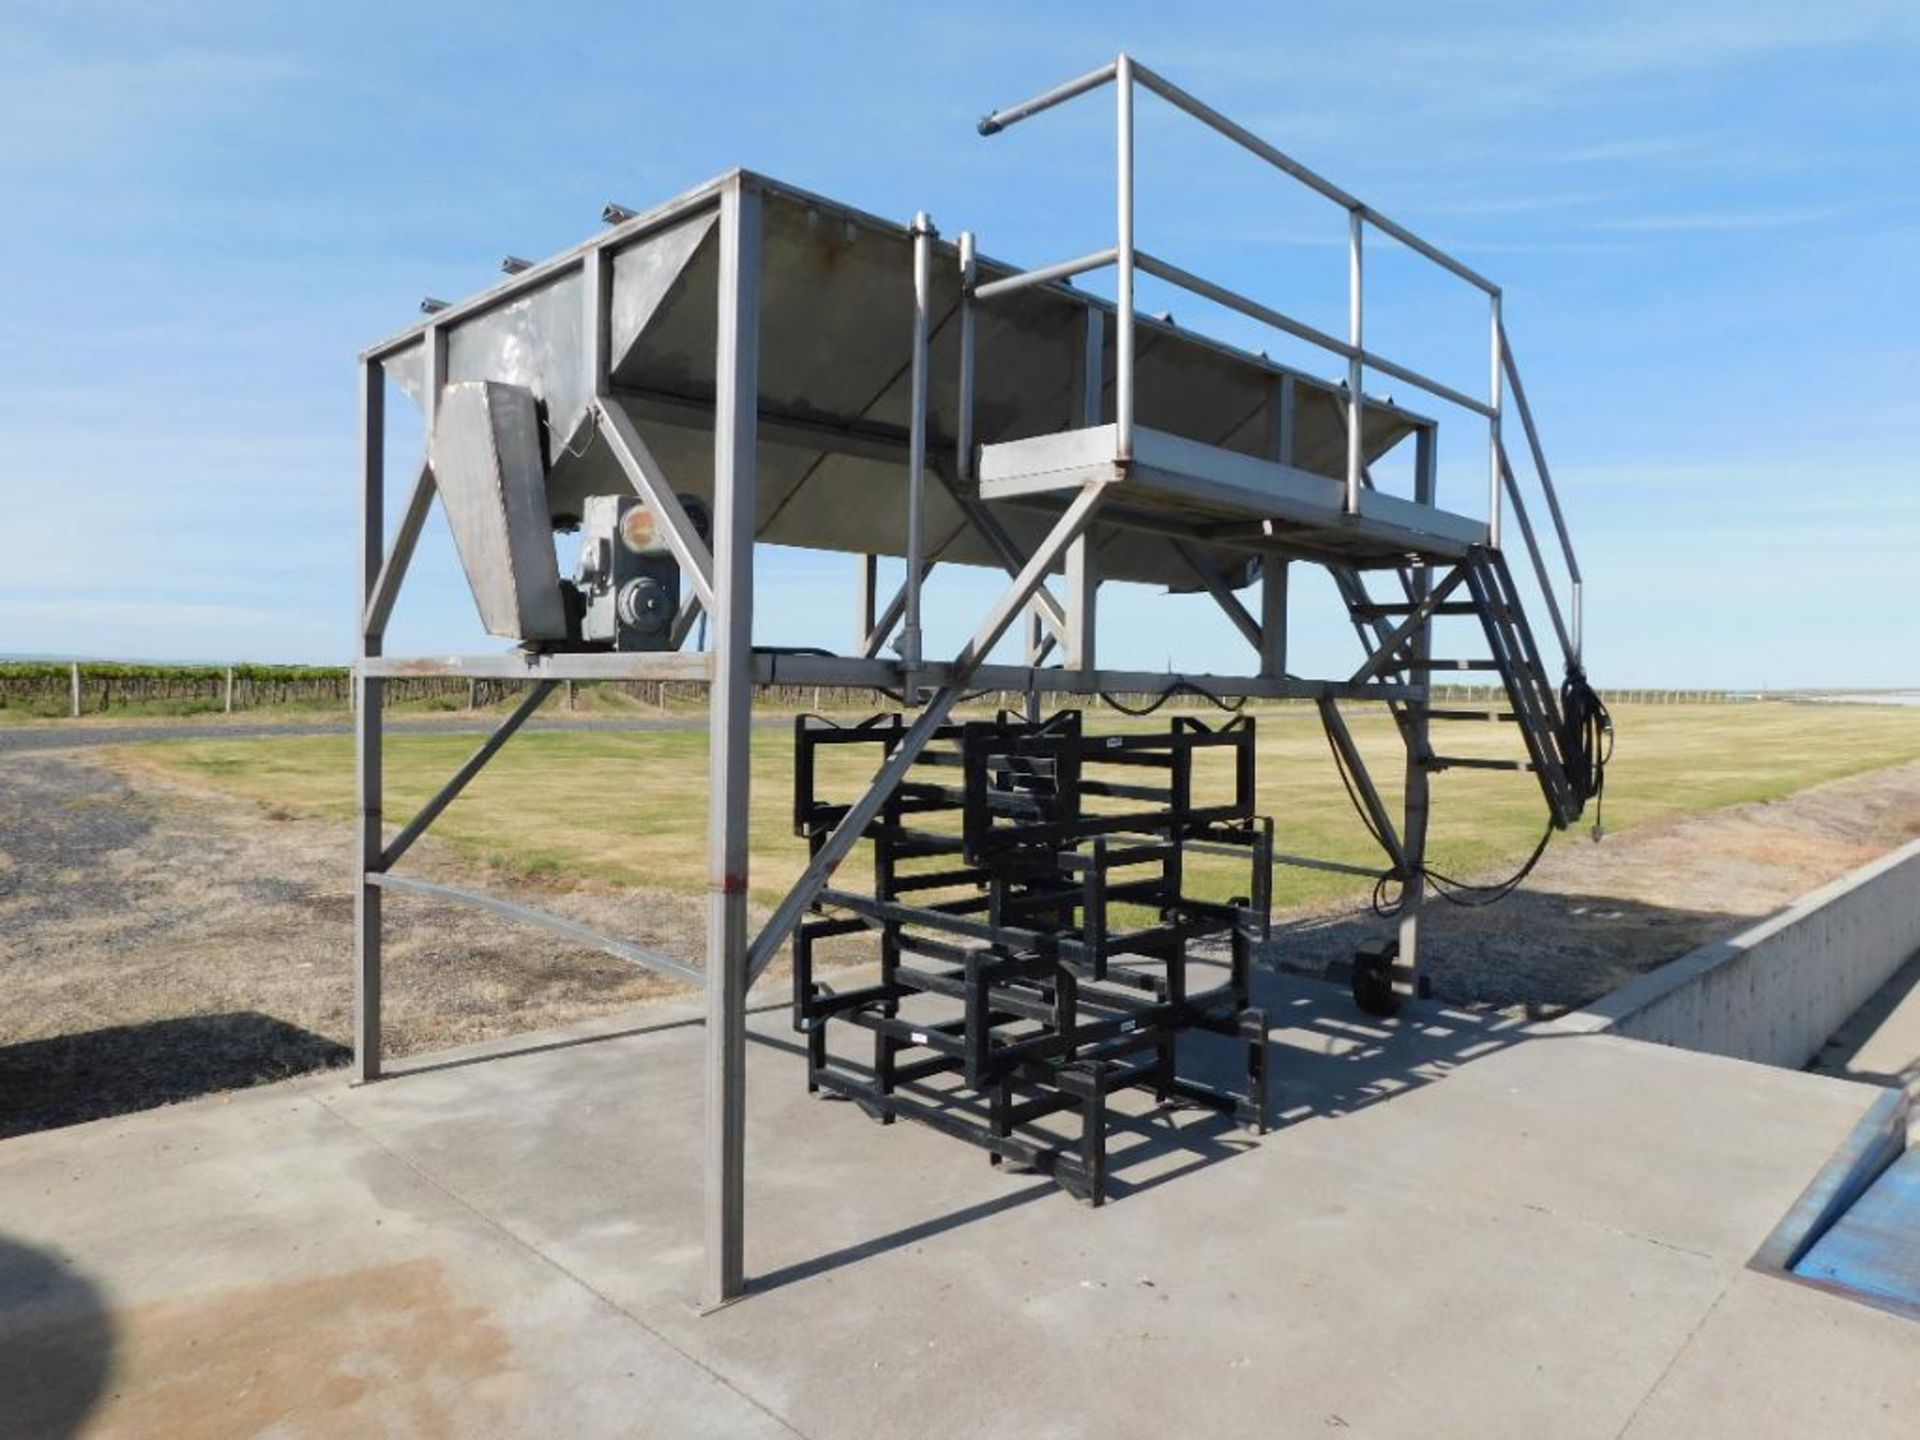 Stainless Steel Hopper w/Auger on Elevated Portable Platform (LOCATED IN WINERY)